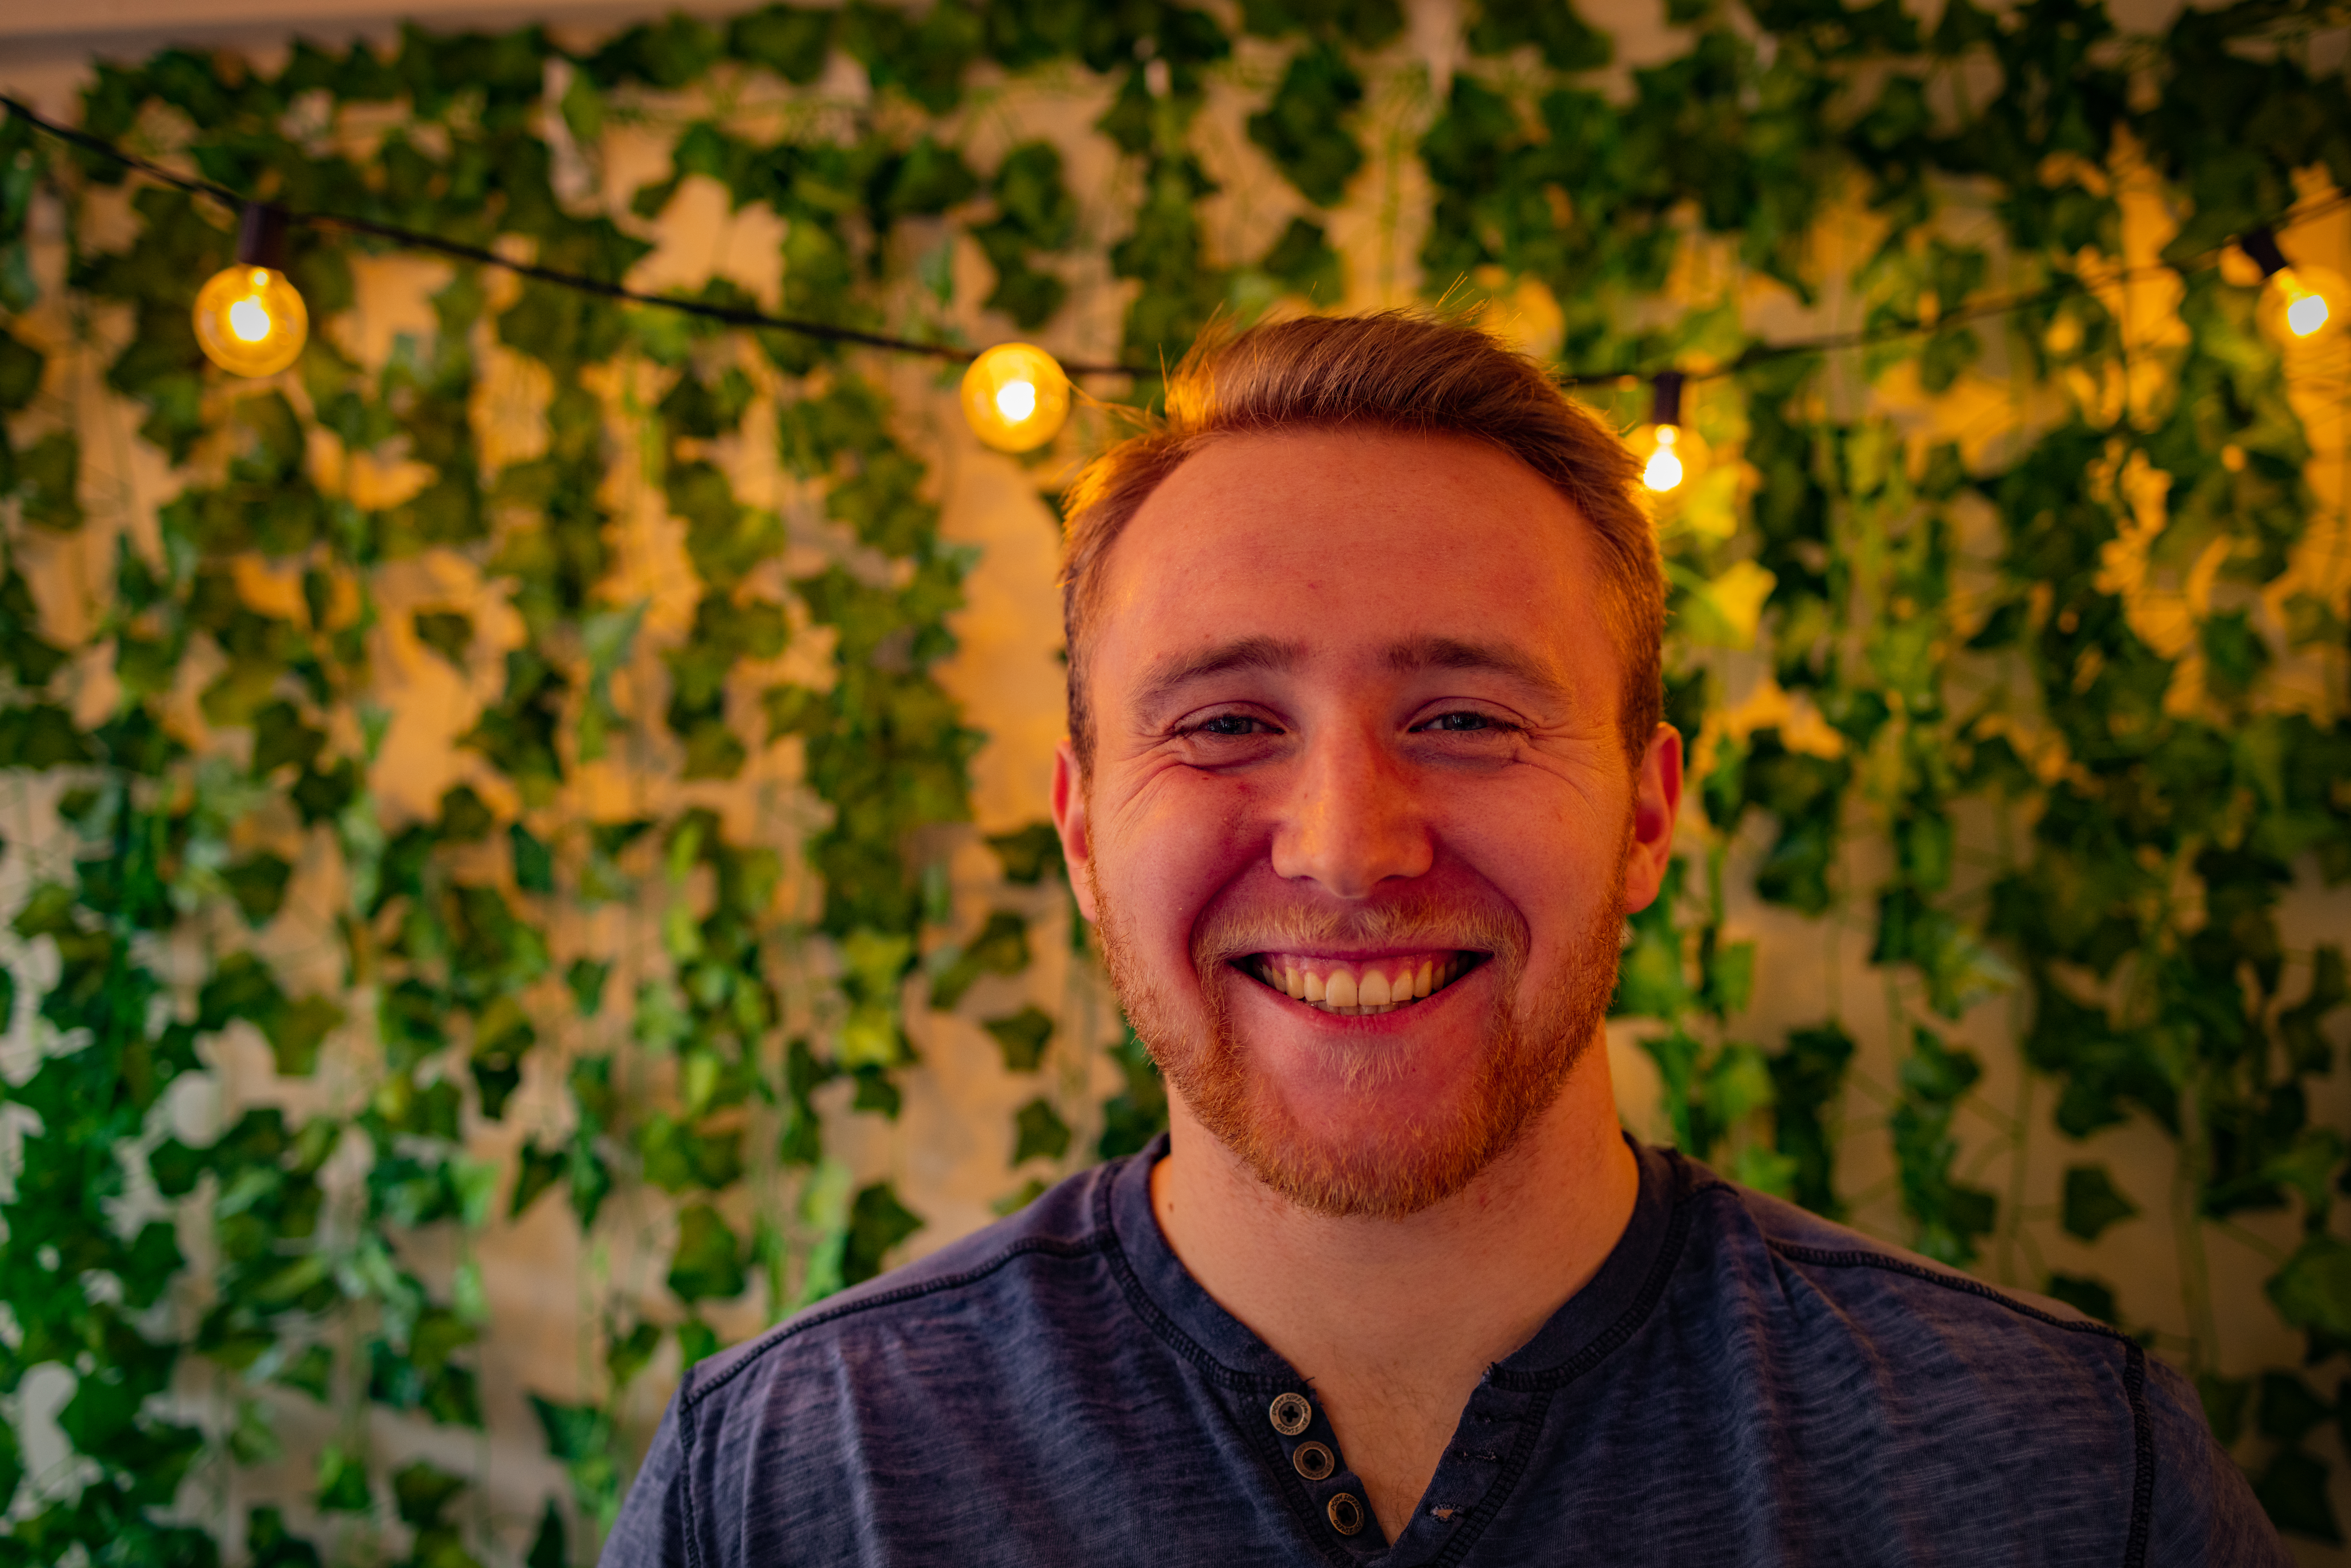 Drexel University's College of Nursing and Health Professions Health Sciences student Nicholas Eltman standing in front of an ivy covered wall.